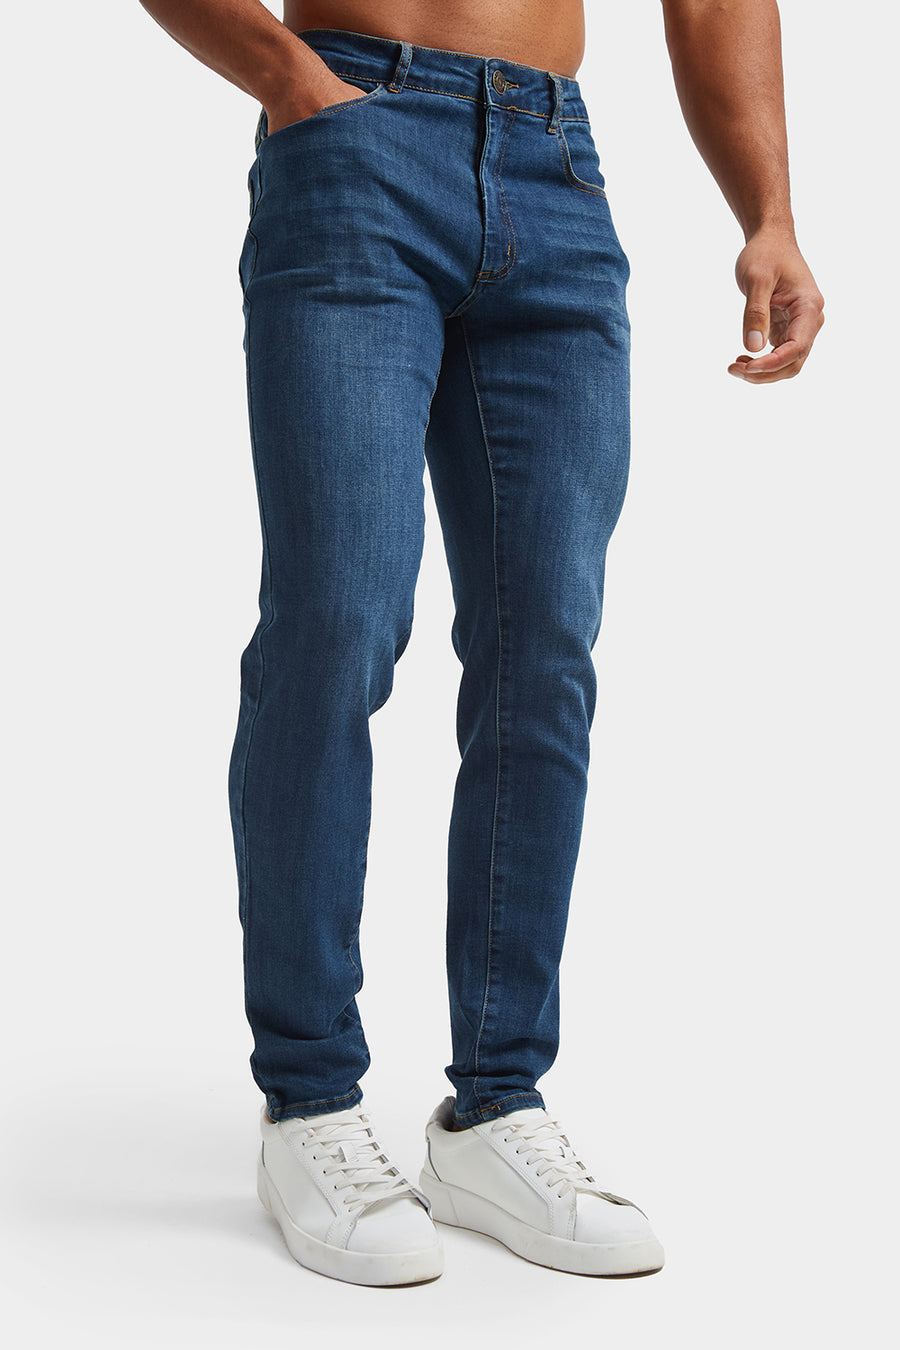 Athletic Fit Jeans - Tailored Athlete - TAILORED ATHLETE - USA